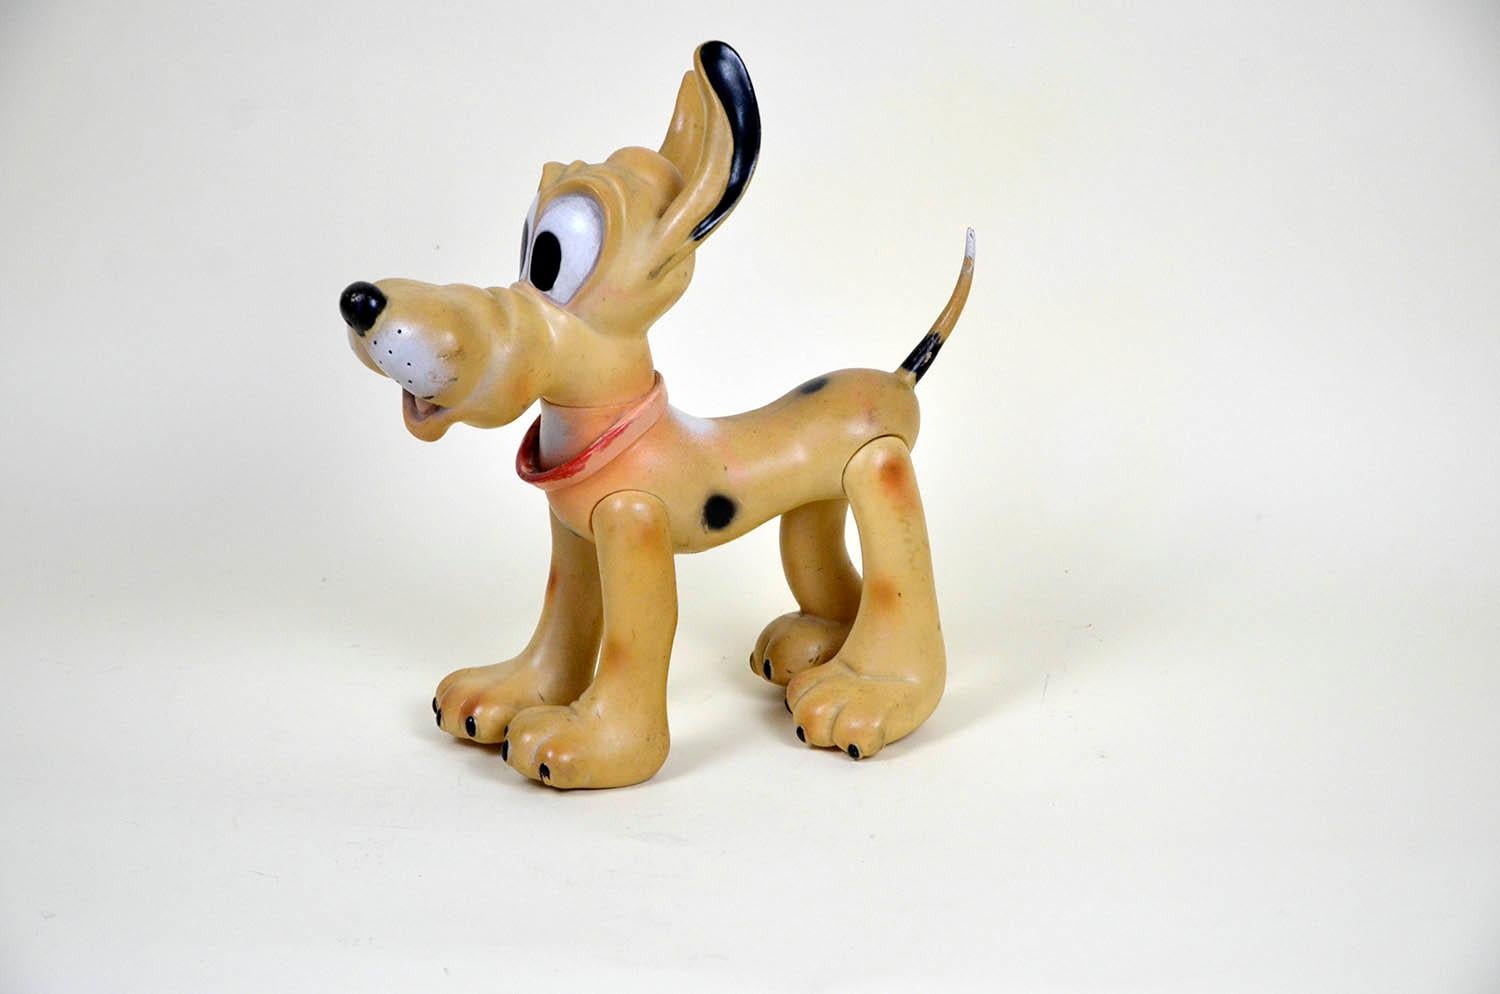 Vintage Pluto the pup squeak rubber toy made by Ledraplastic Italy in the 1960s.

All four legs and head are movable. 

Marked Walt Disney Production on the back and stamped with Ledraplastic elephant symbol.

Collector's note:

In 1962, the